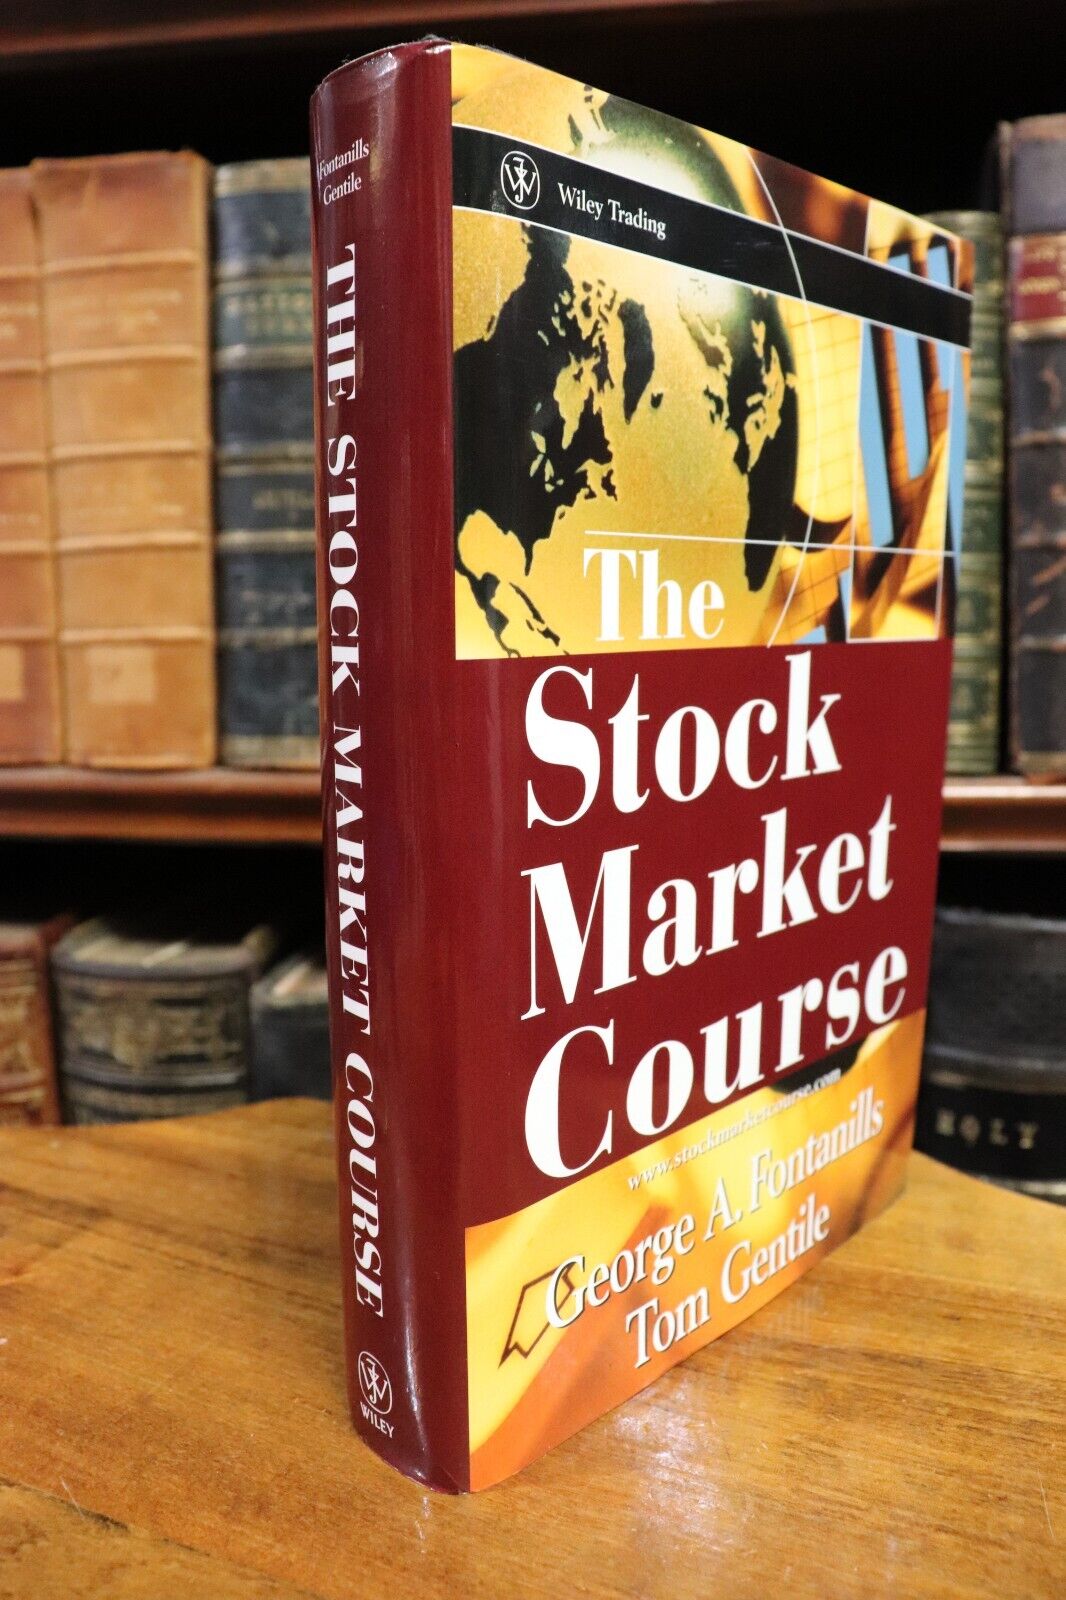 The Stock Market Course by GA Fontanills - 2001 - Stock Market Investing Book